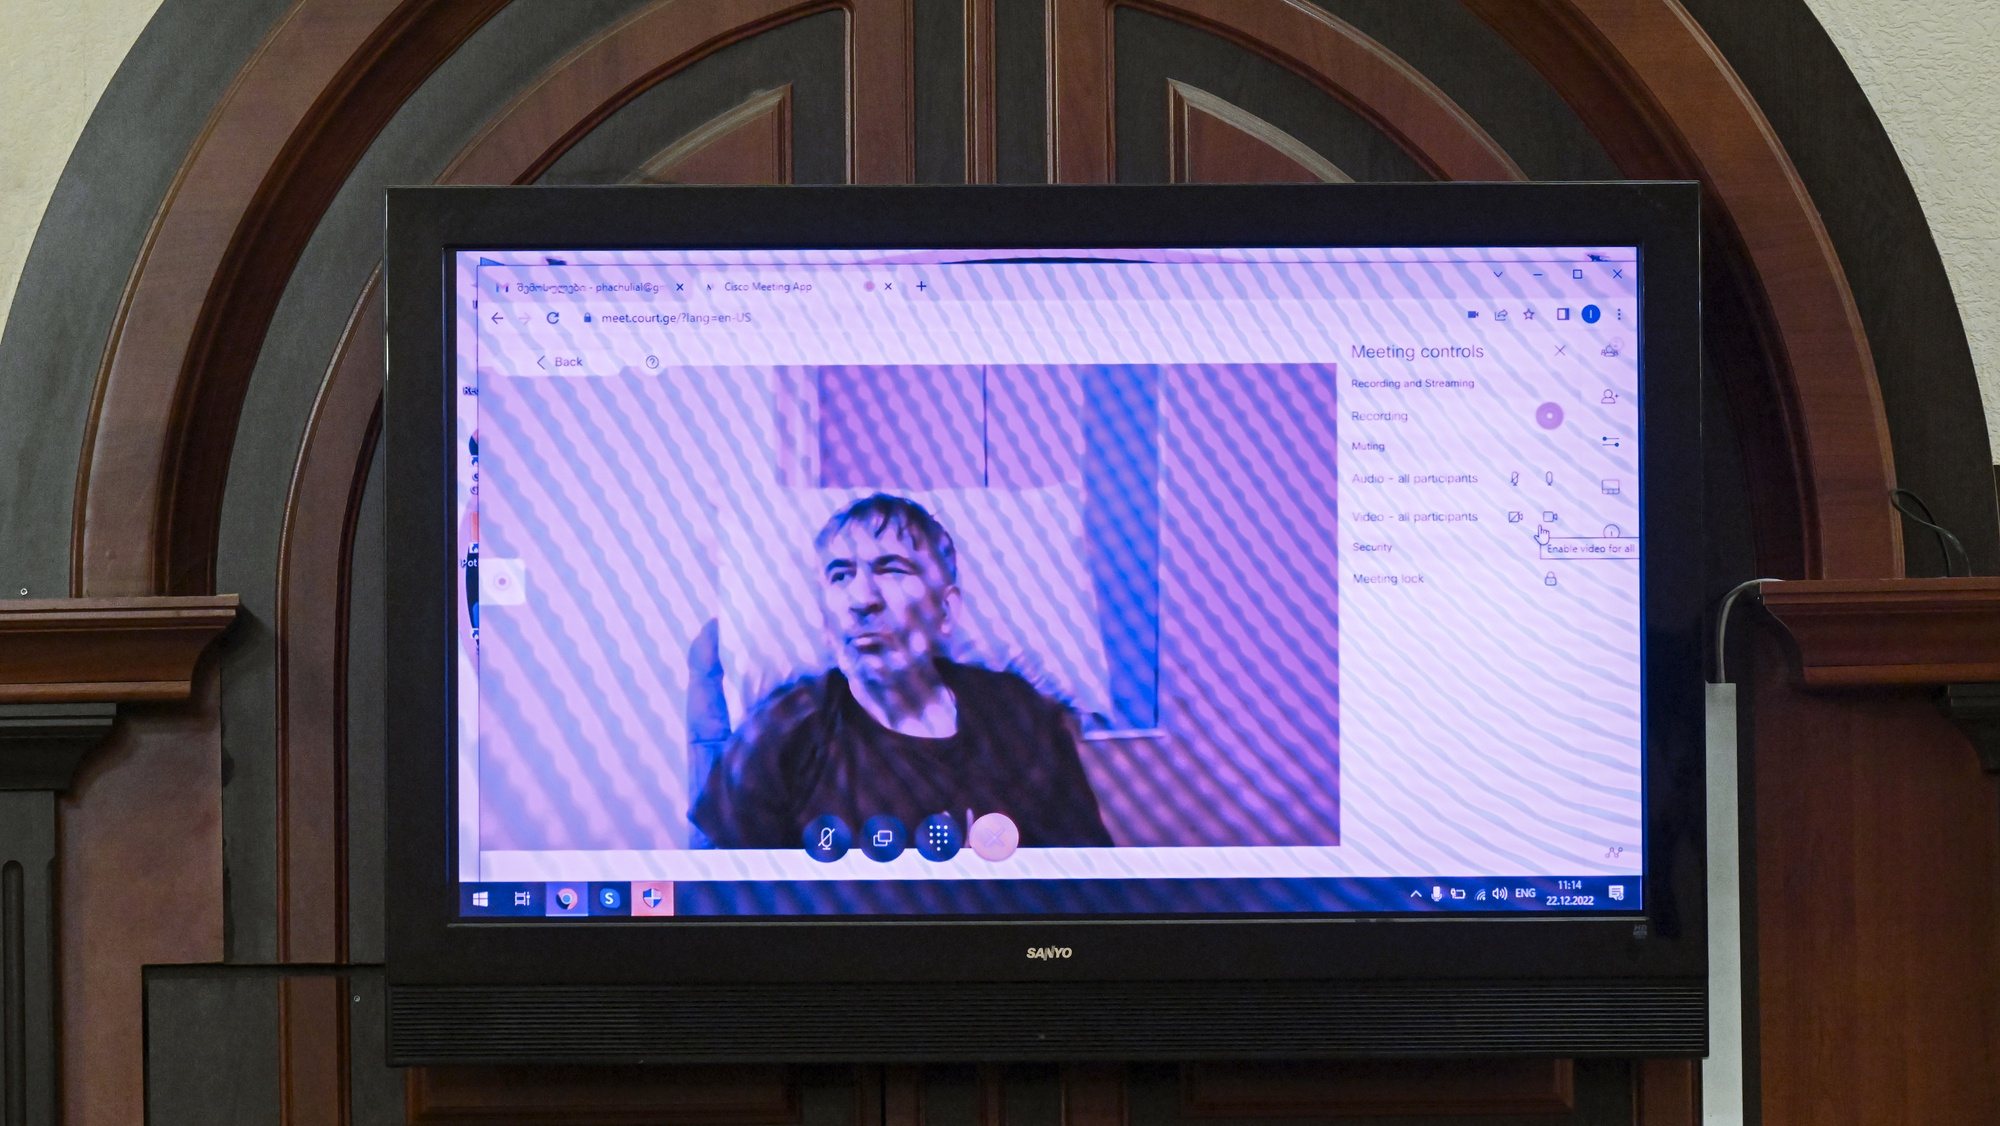 epa10451488 (FILE) - Georgia&#039;s former President Mikhail Saakashvili appears via video link from the hospital during a hearing for his release on health grounds, in Tbilisi city court, Georgia, 22 December 2022 (reissued 06 February 2023). Saakashvili&#039;s press team on 06 February 2023 shared a message stating he &quot;basically got a death sentence and will stay in prison,&quot; referencing to an appeal rejected by a Tbilisi court to release Saakashvili from prison on health grounds. Former Georgian president and Odesa governor Saakashvili in October 2021 was arrested and placed in a prison in the city of Rustavi but in May 2022 he was taken to the private clinic in Tbilisi, where he remains to this day  EPA/ZURAB KURTSIKIDZE